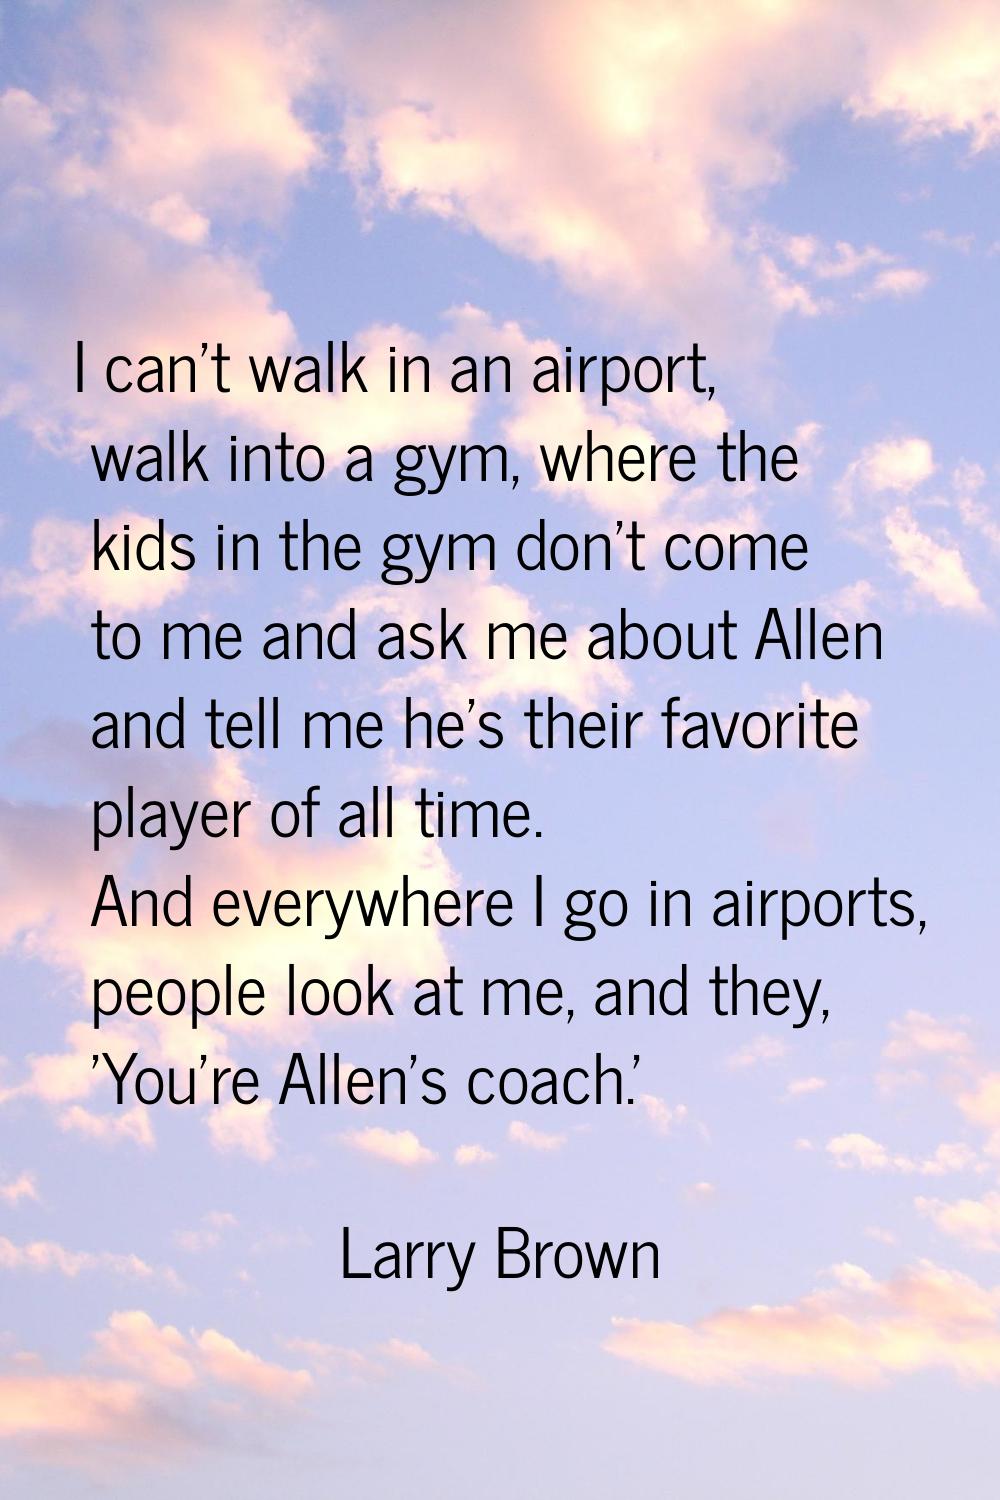 I can't walk in an airport, walk into a gym, where the kids in the gym don't come to me and ask me 